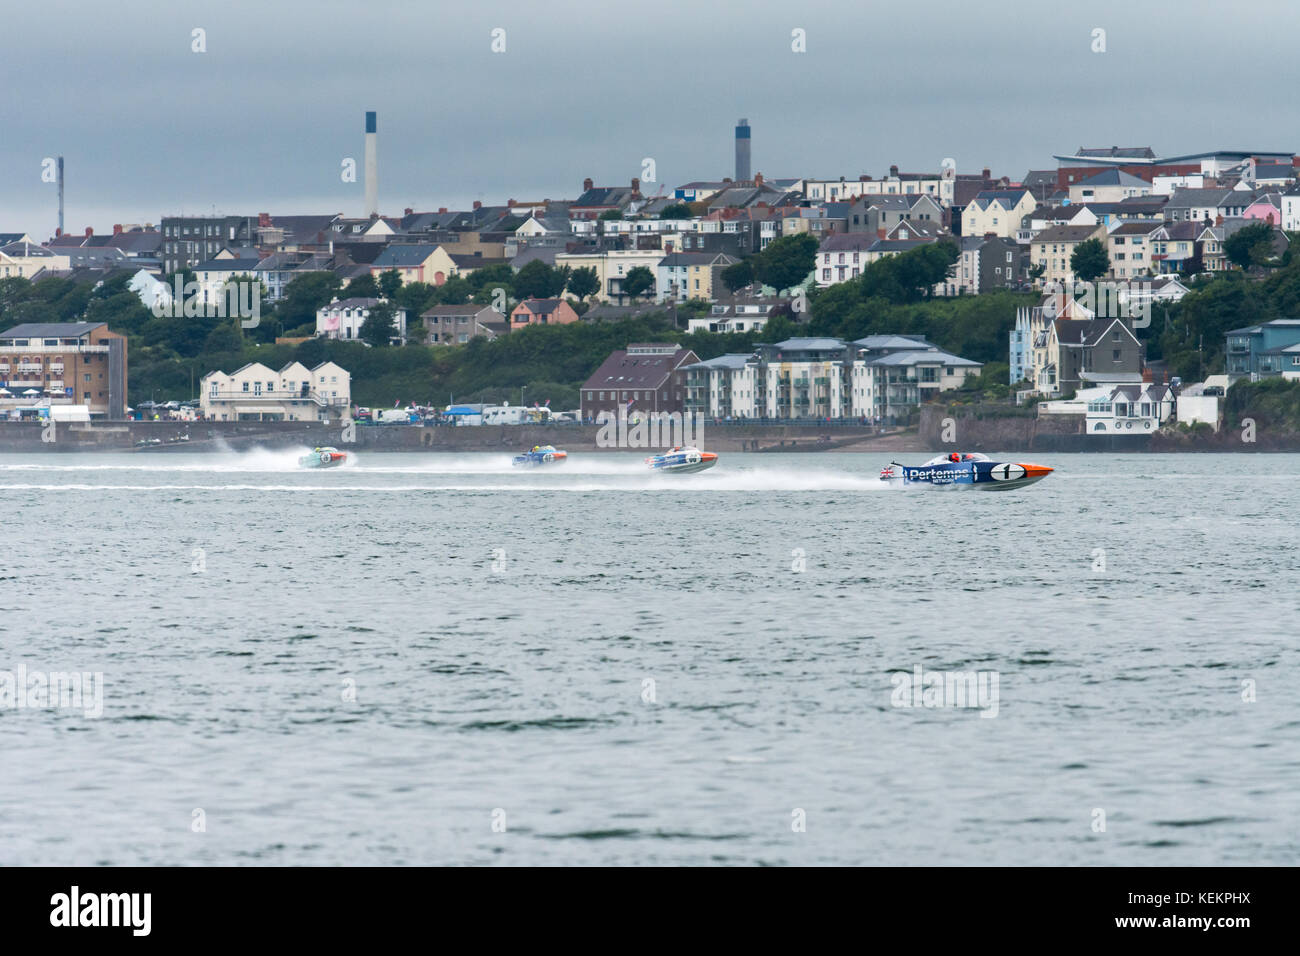 Powerboat racing on the calm waters of Milford Haven Stock Photo